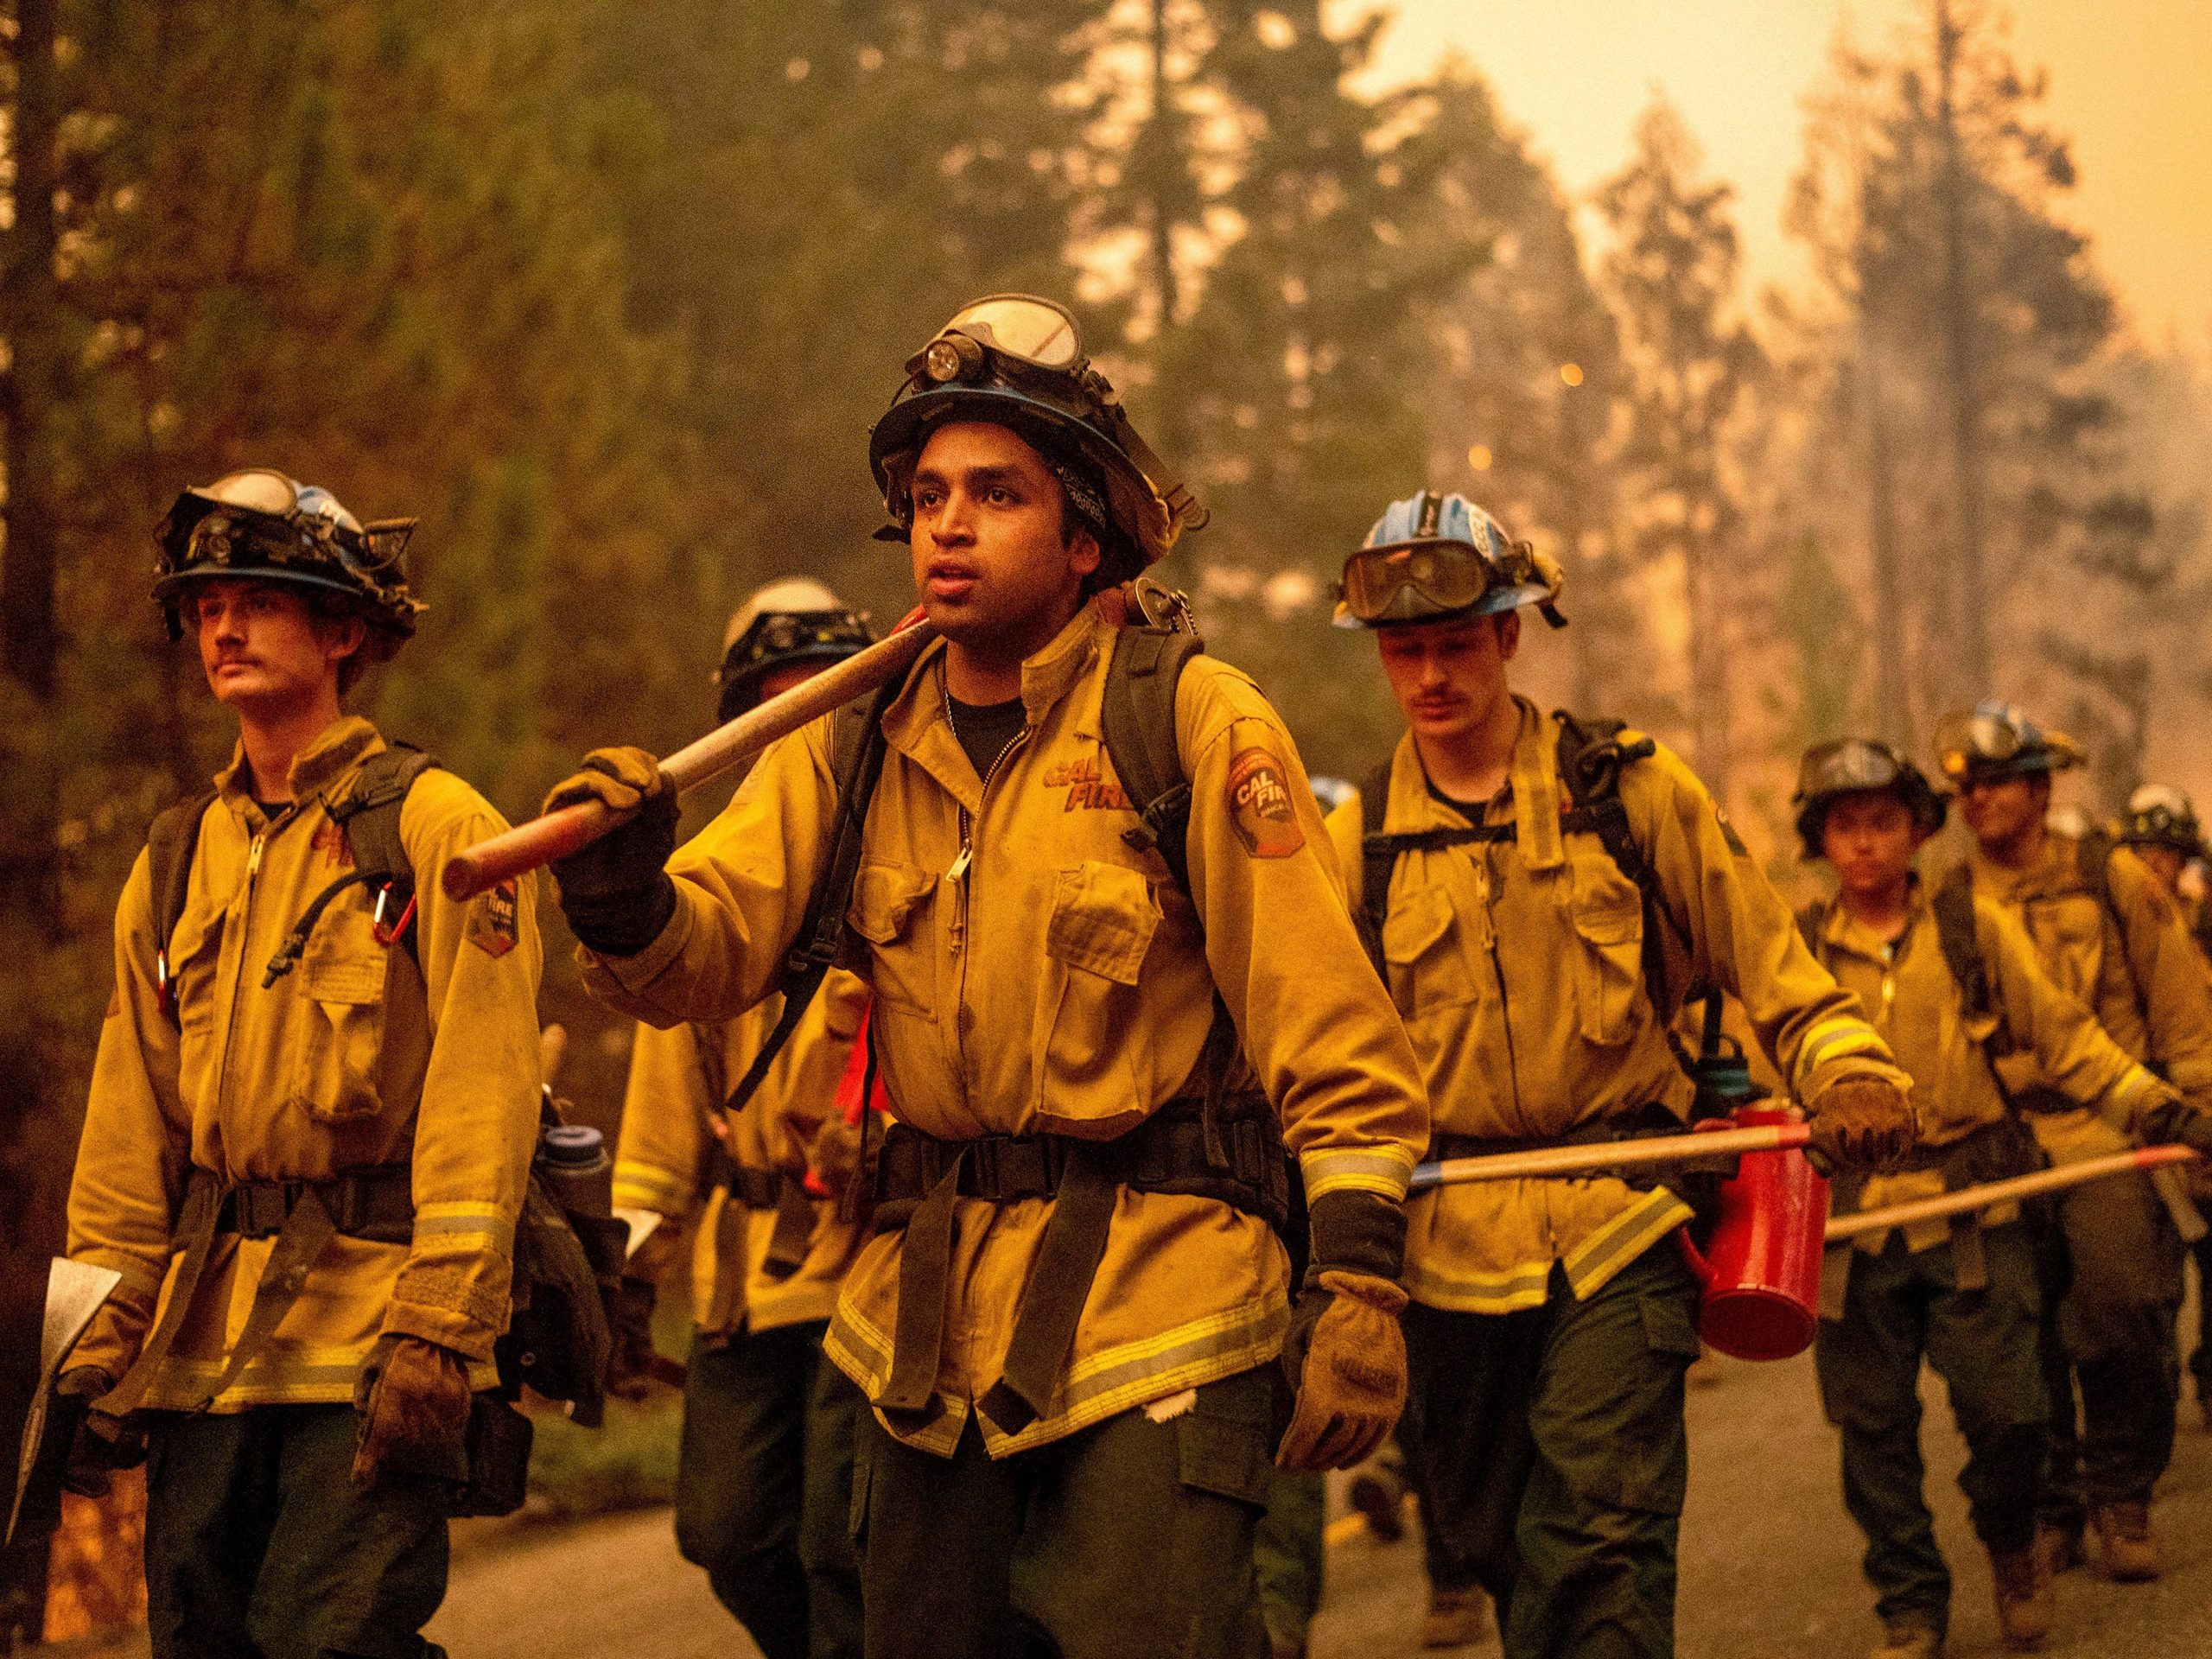 Multiple firefighters walk through the forest.